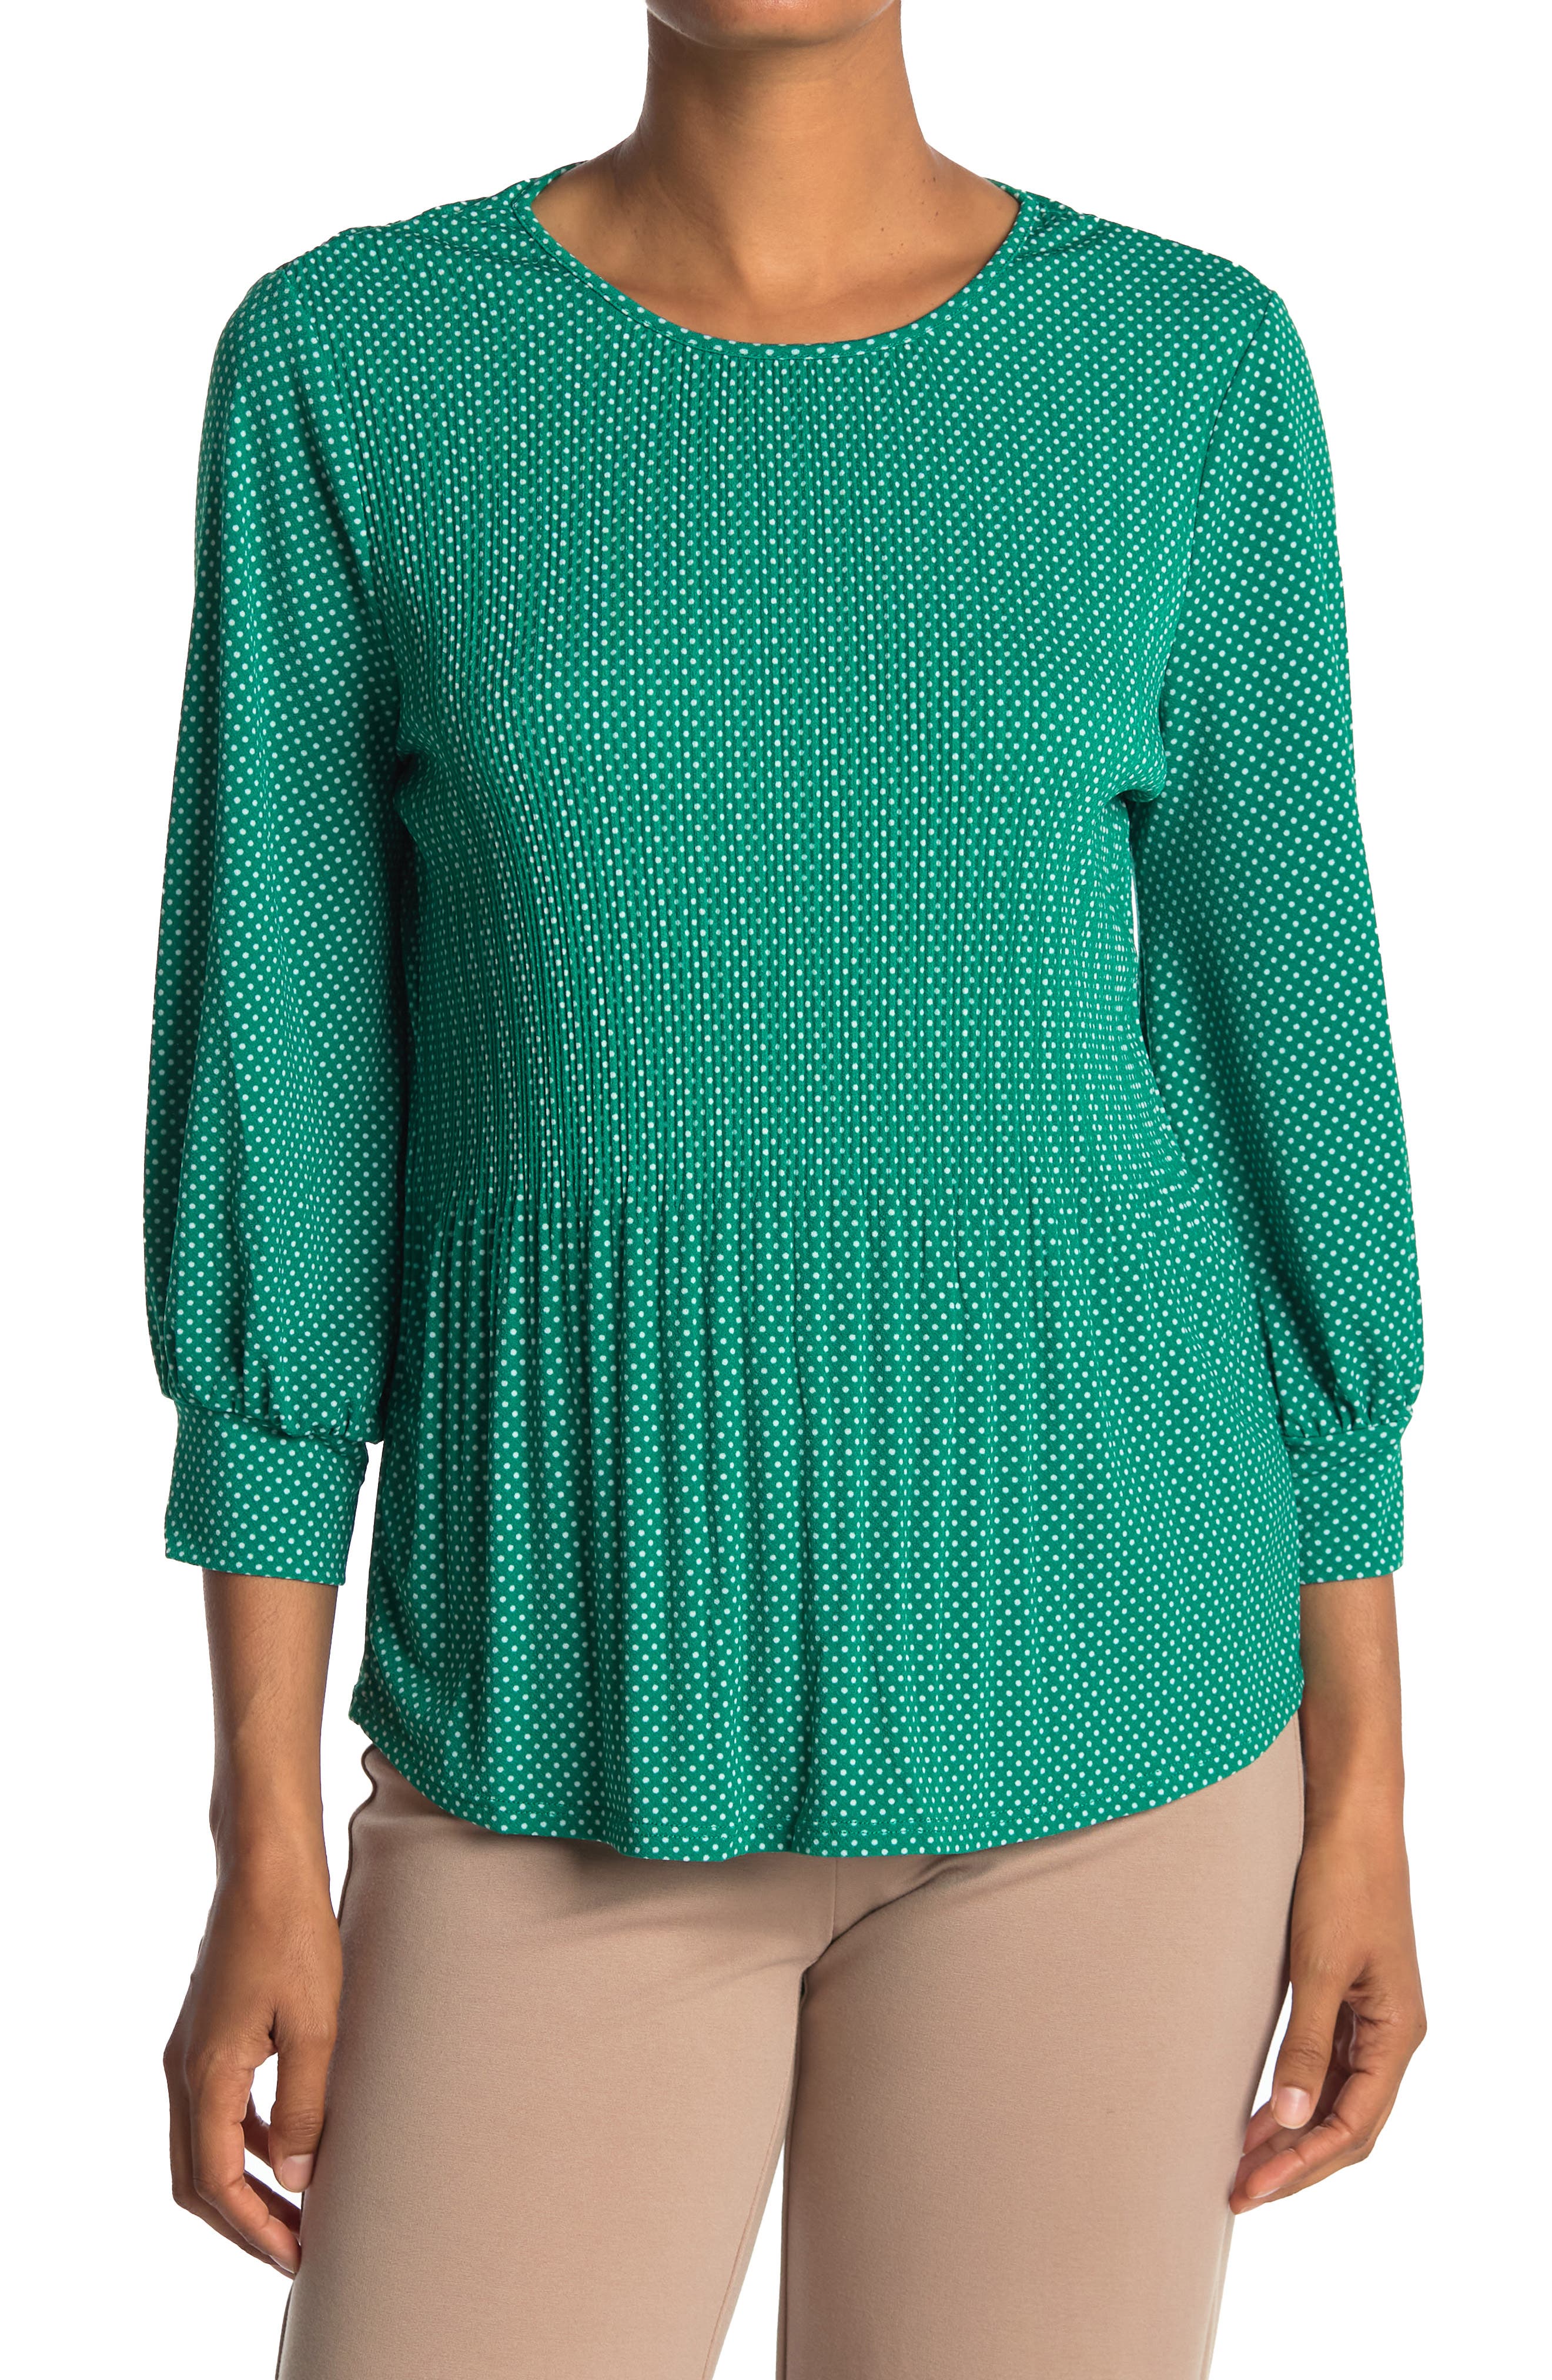 Adrianna Papell 3/4 Sleeve Pleated Moss Crepe Top In Emrdismldt